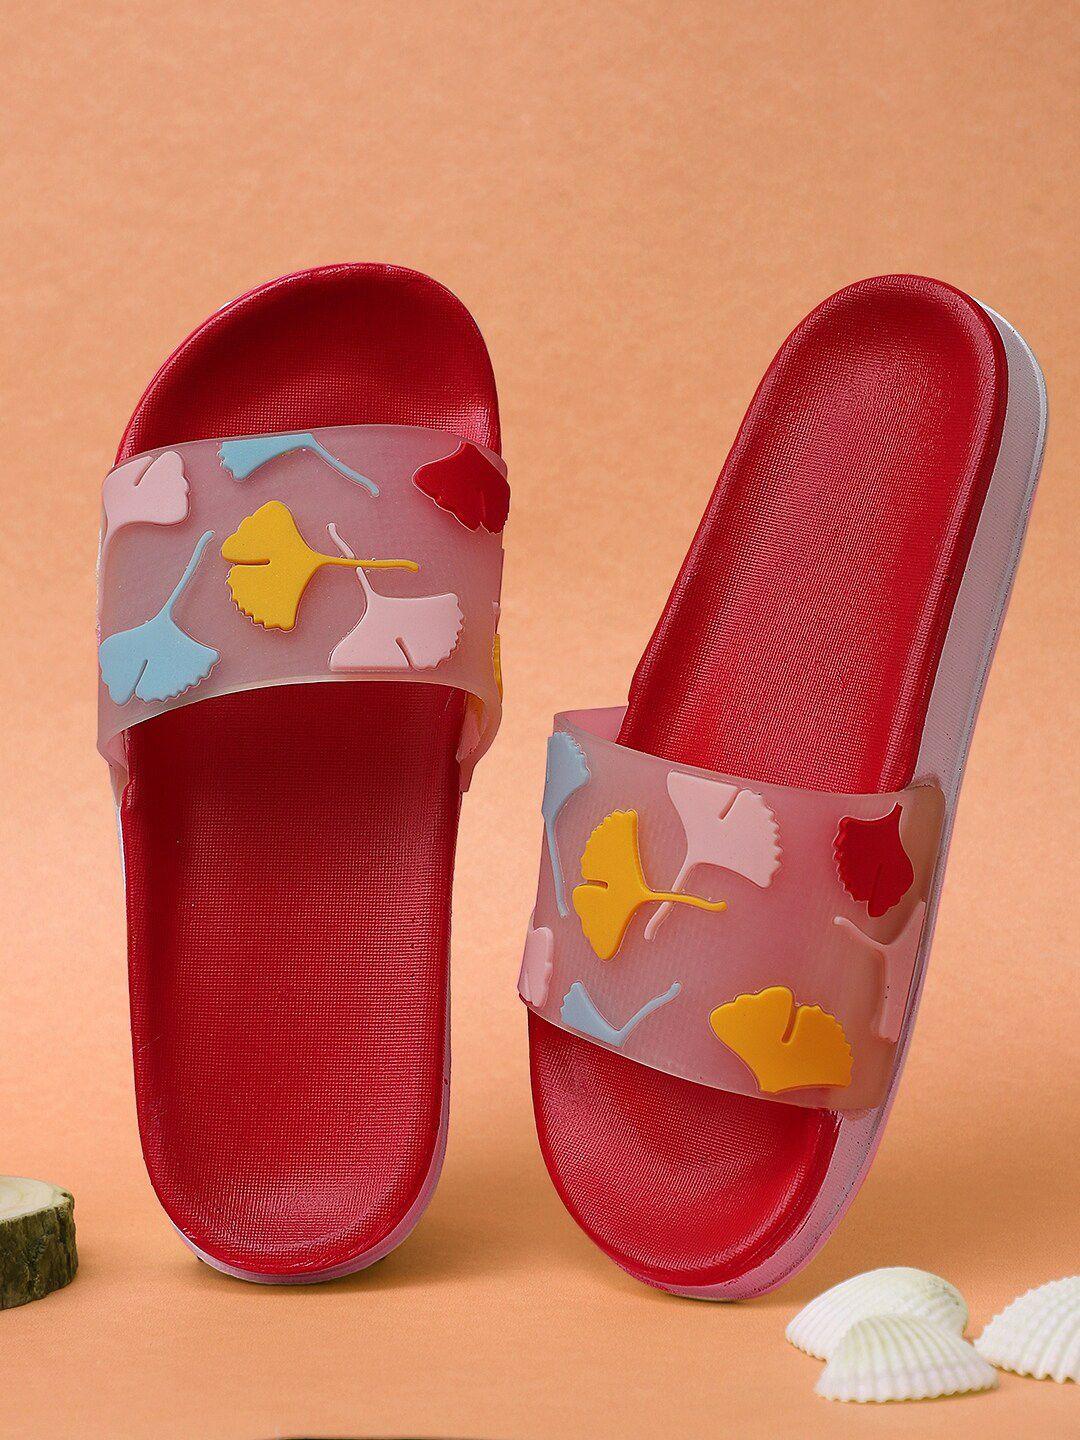 pampy angel women red & white printed rubber sliders